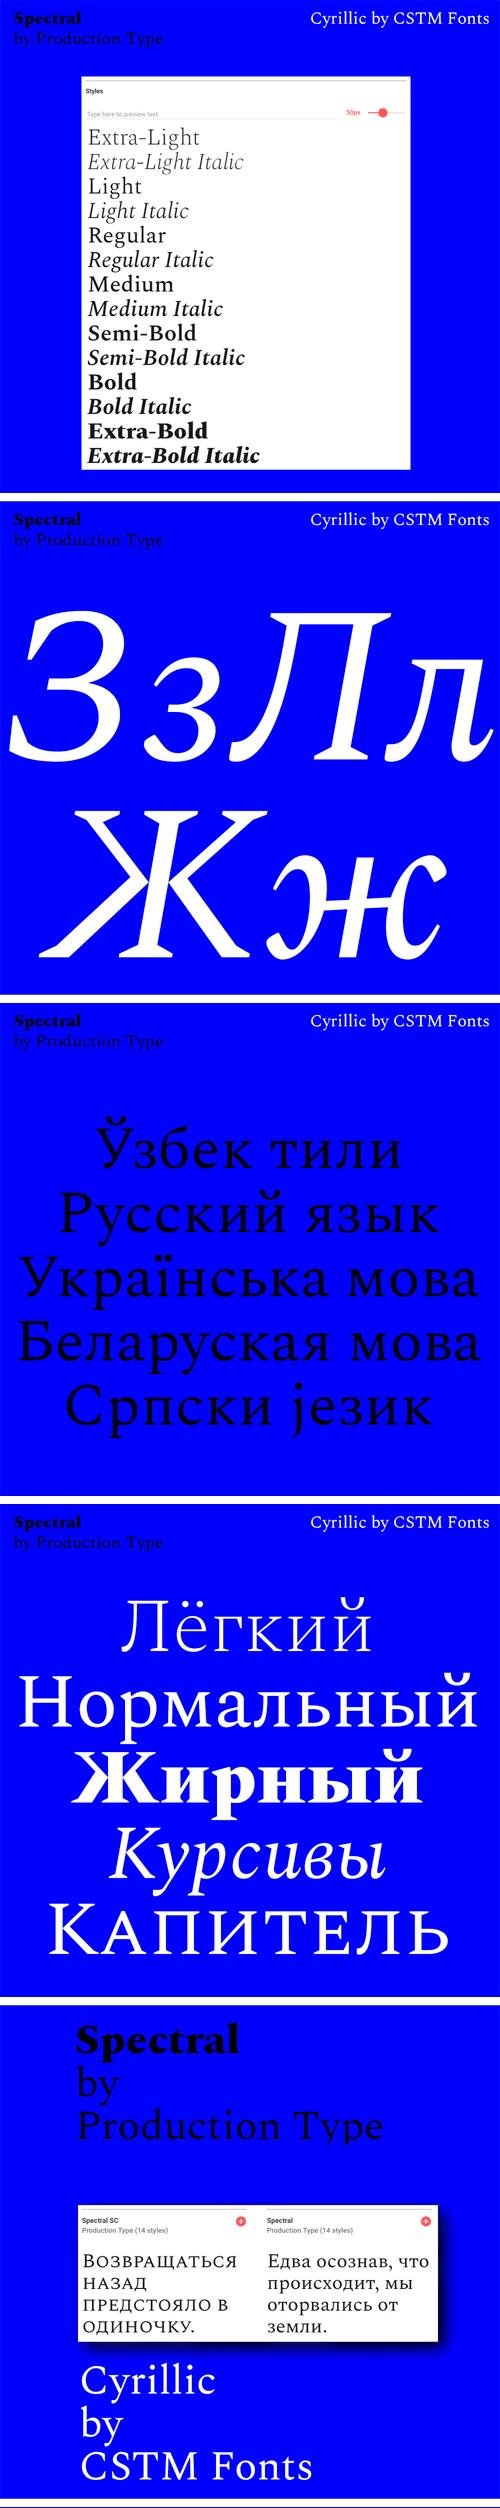 Spectral Font Family [with Cyrillic Support]